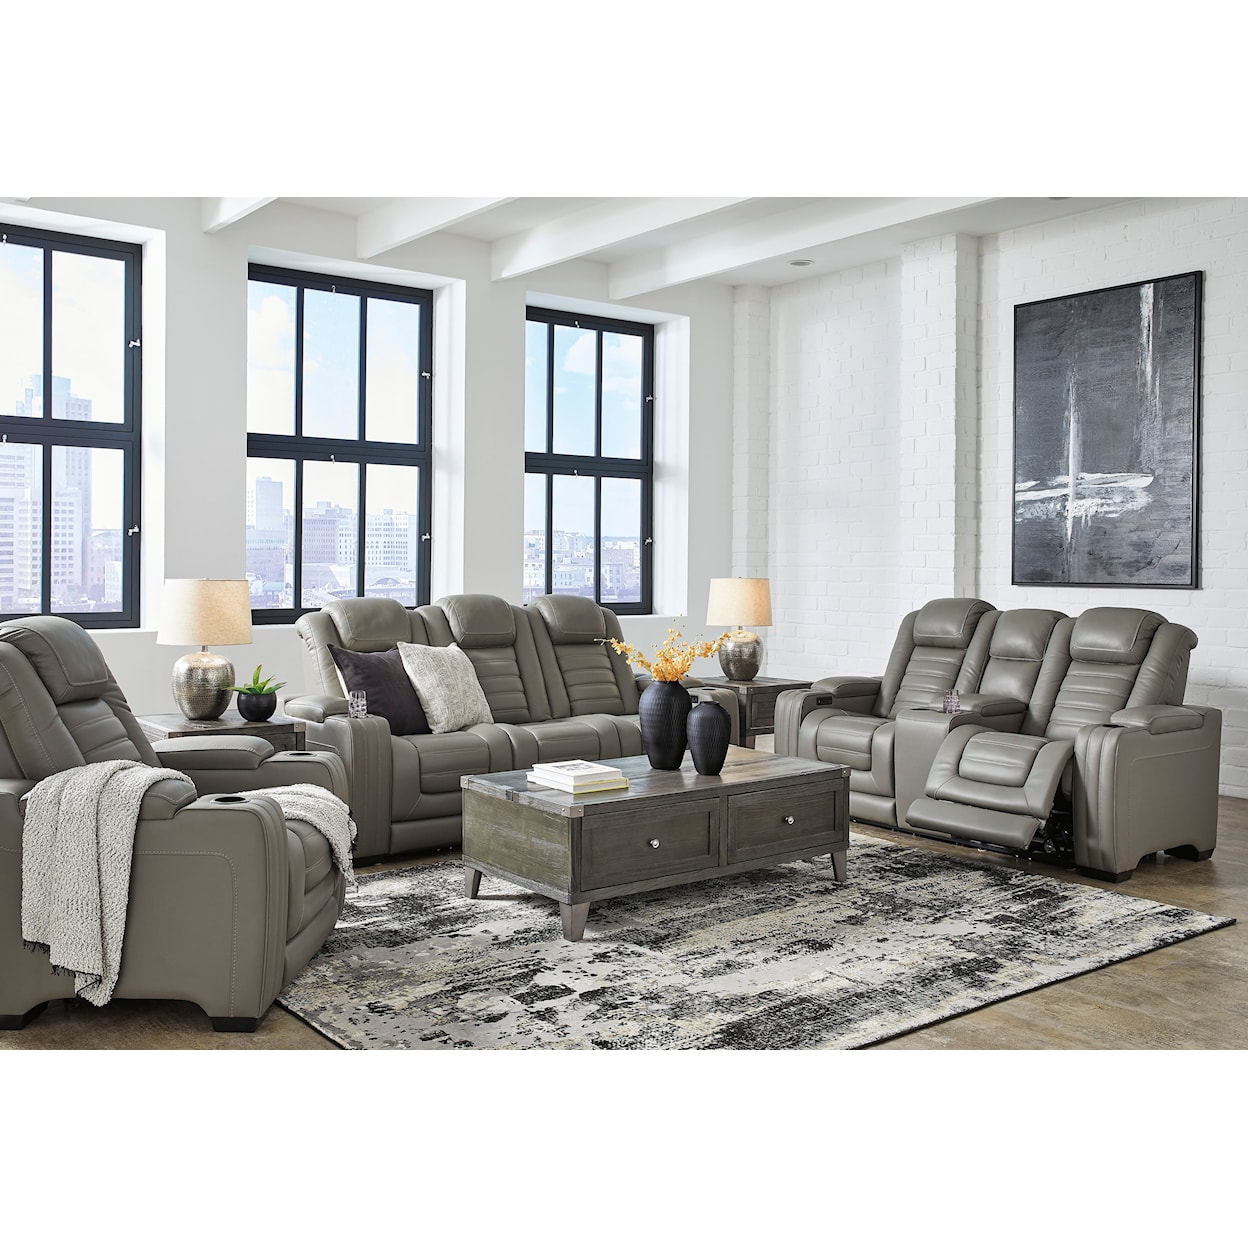 Signature Design by Ashley Backtrack Power Reclining Loveseat